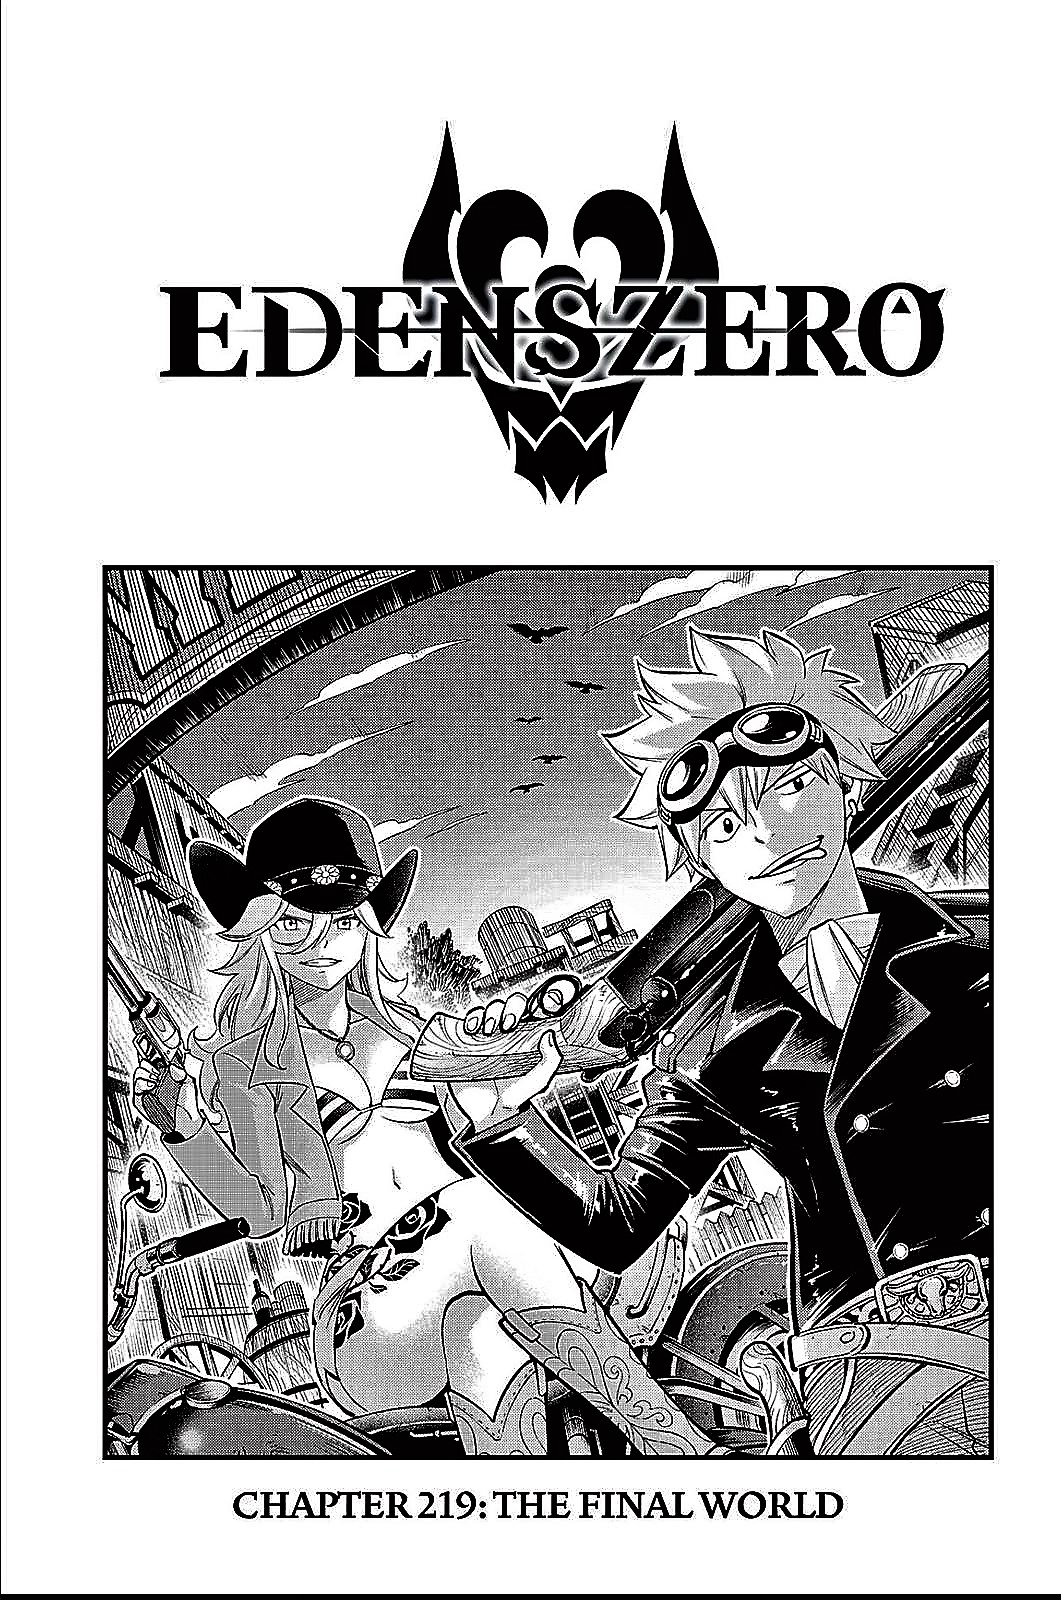 1001 Ways To Say That We’re Going To Universe 0!! Edens Zero Chapter 219 BREAKDOWN